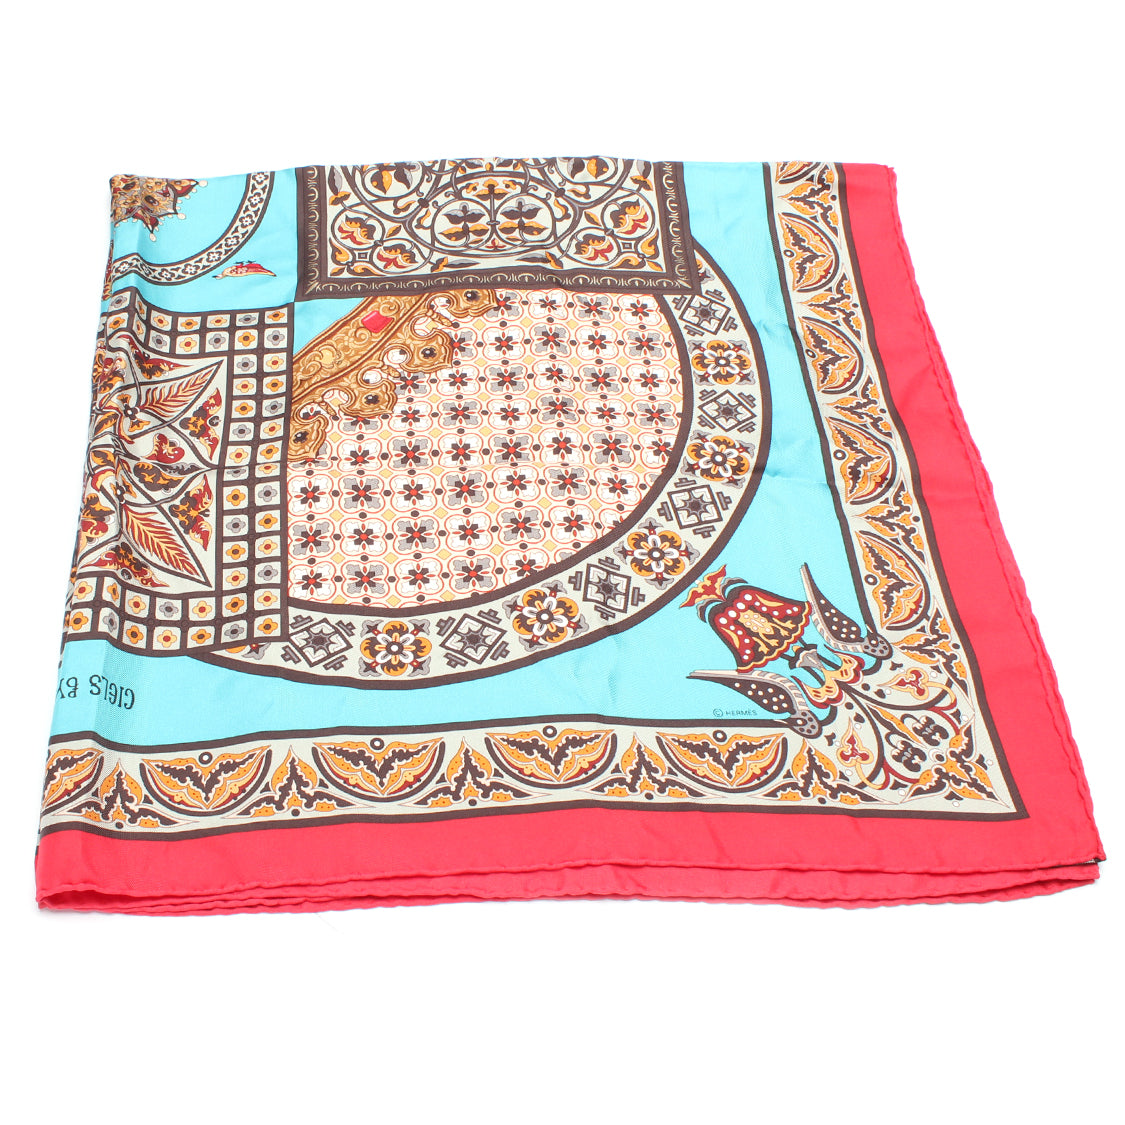 Hermes Ciels Byzantins Scarf Cotton Scarf in Excellent condition